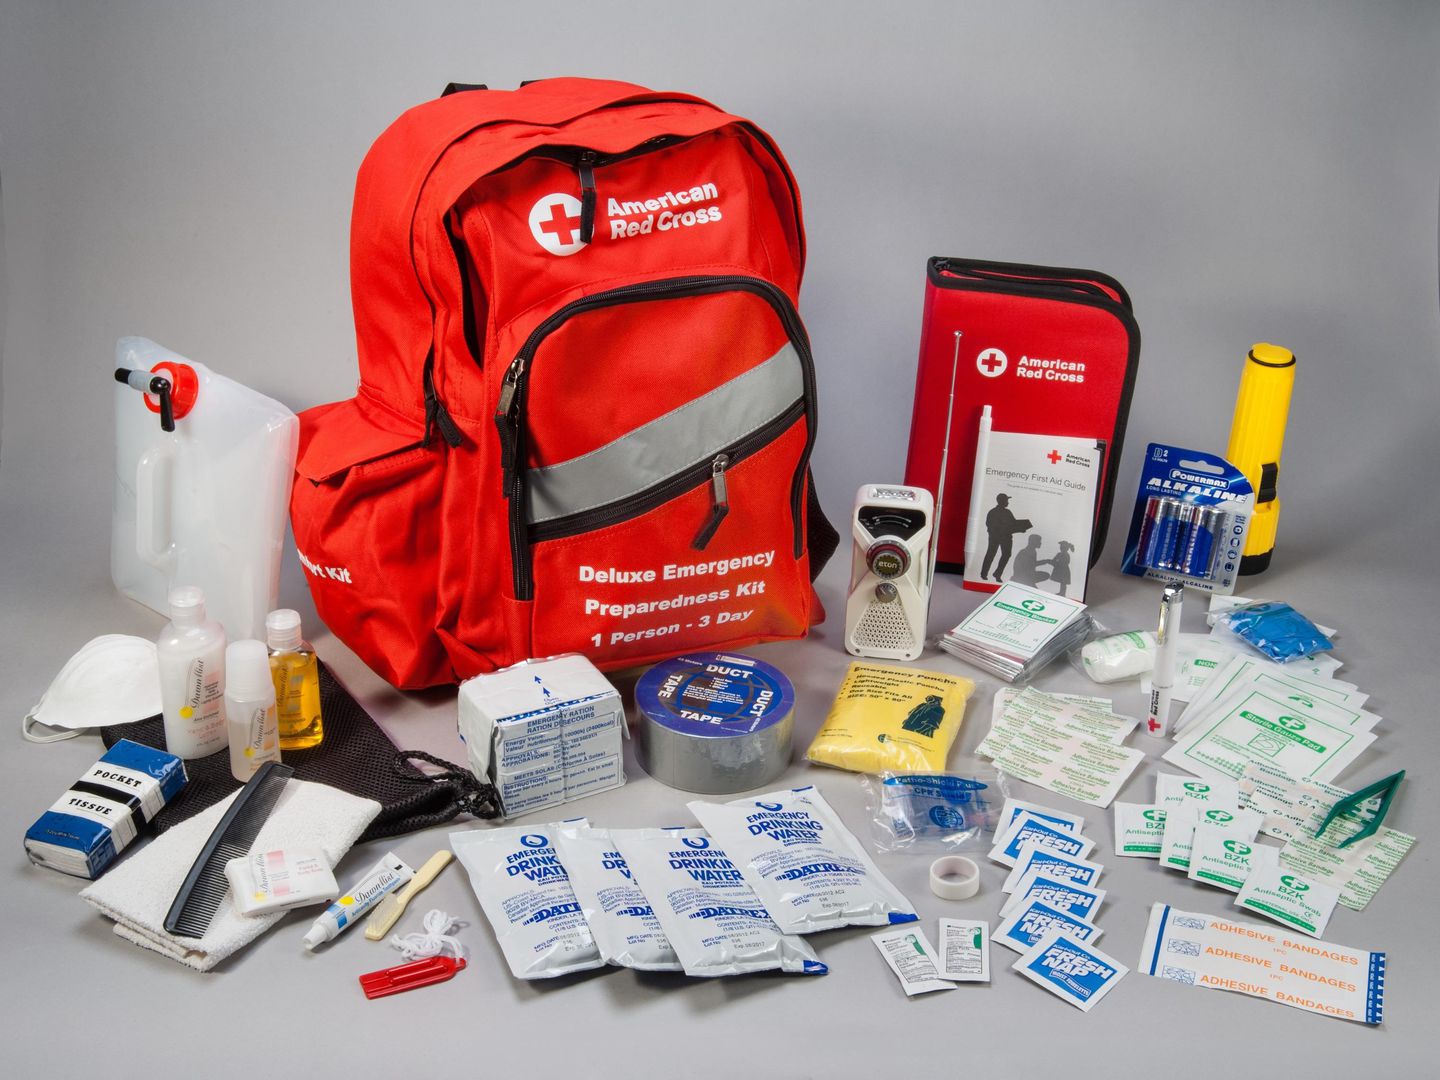 AFCYZYSAJRCQDPHHYQVG7243D4 2 How to build your own Red Cross Emergency Preparedness Kit